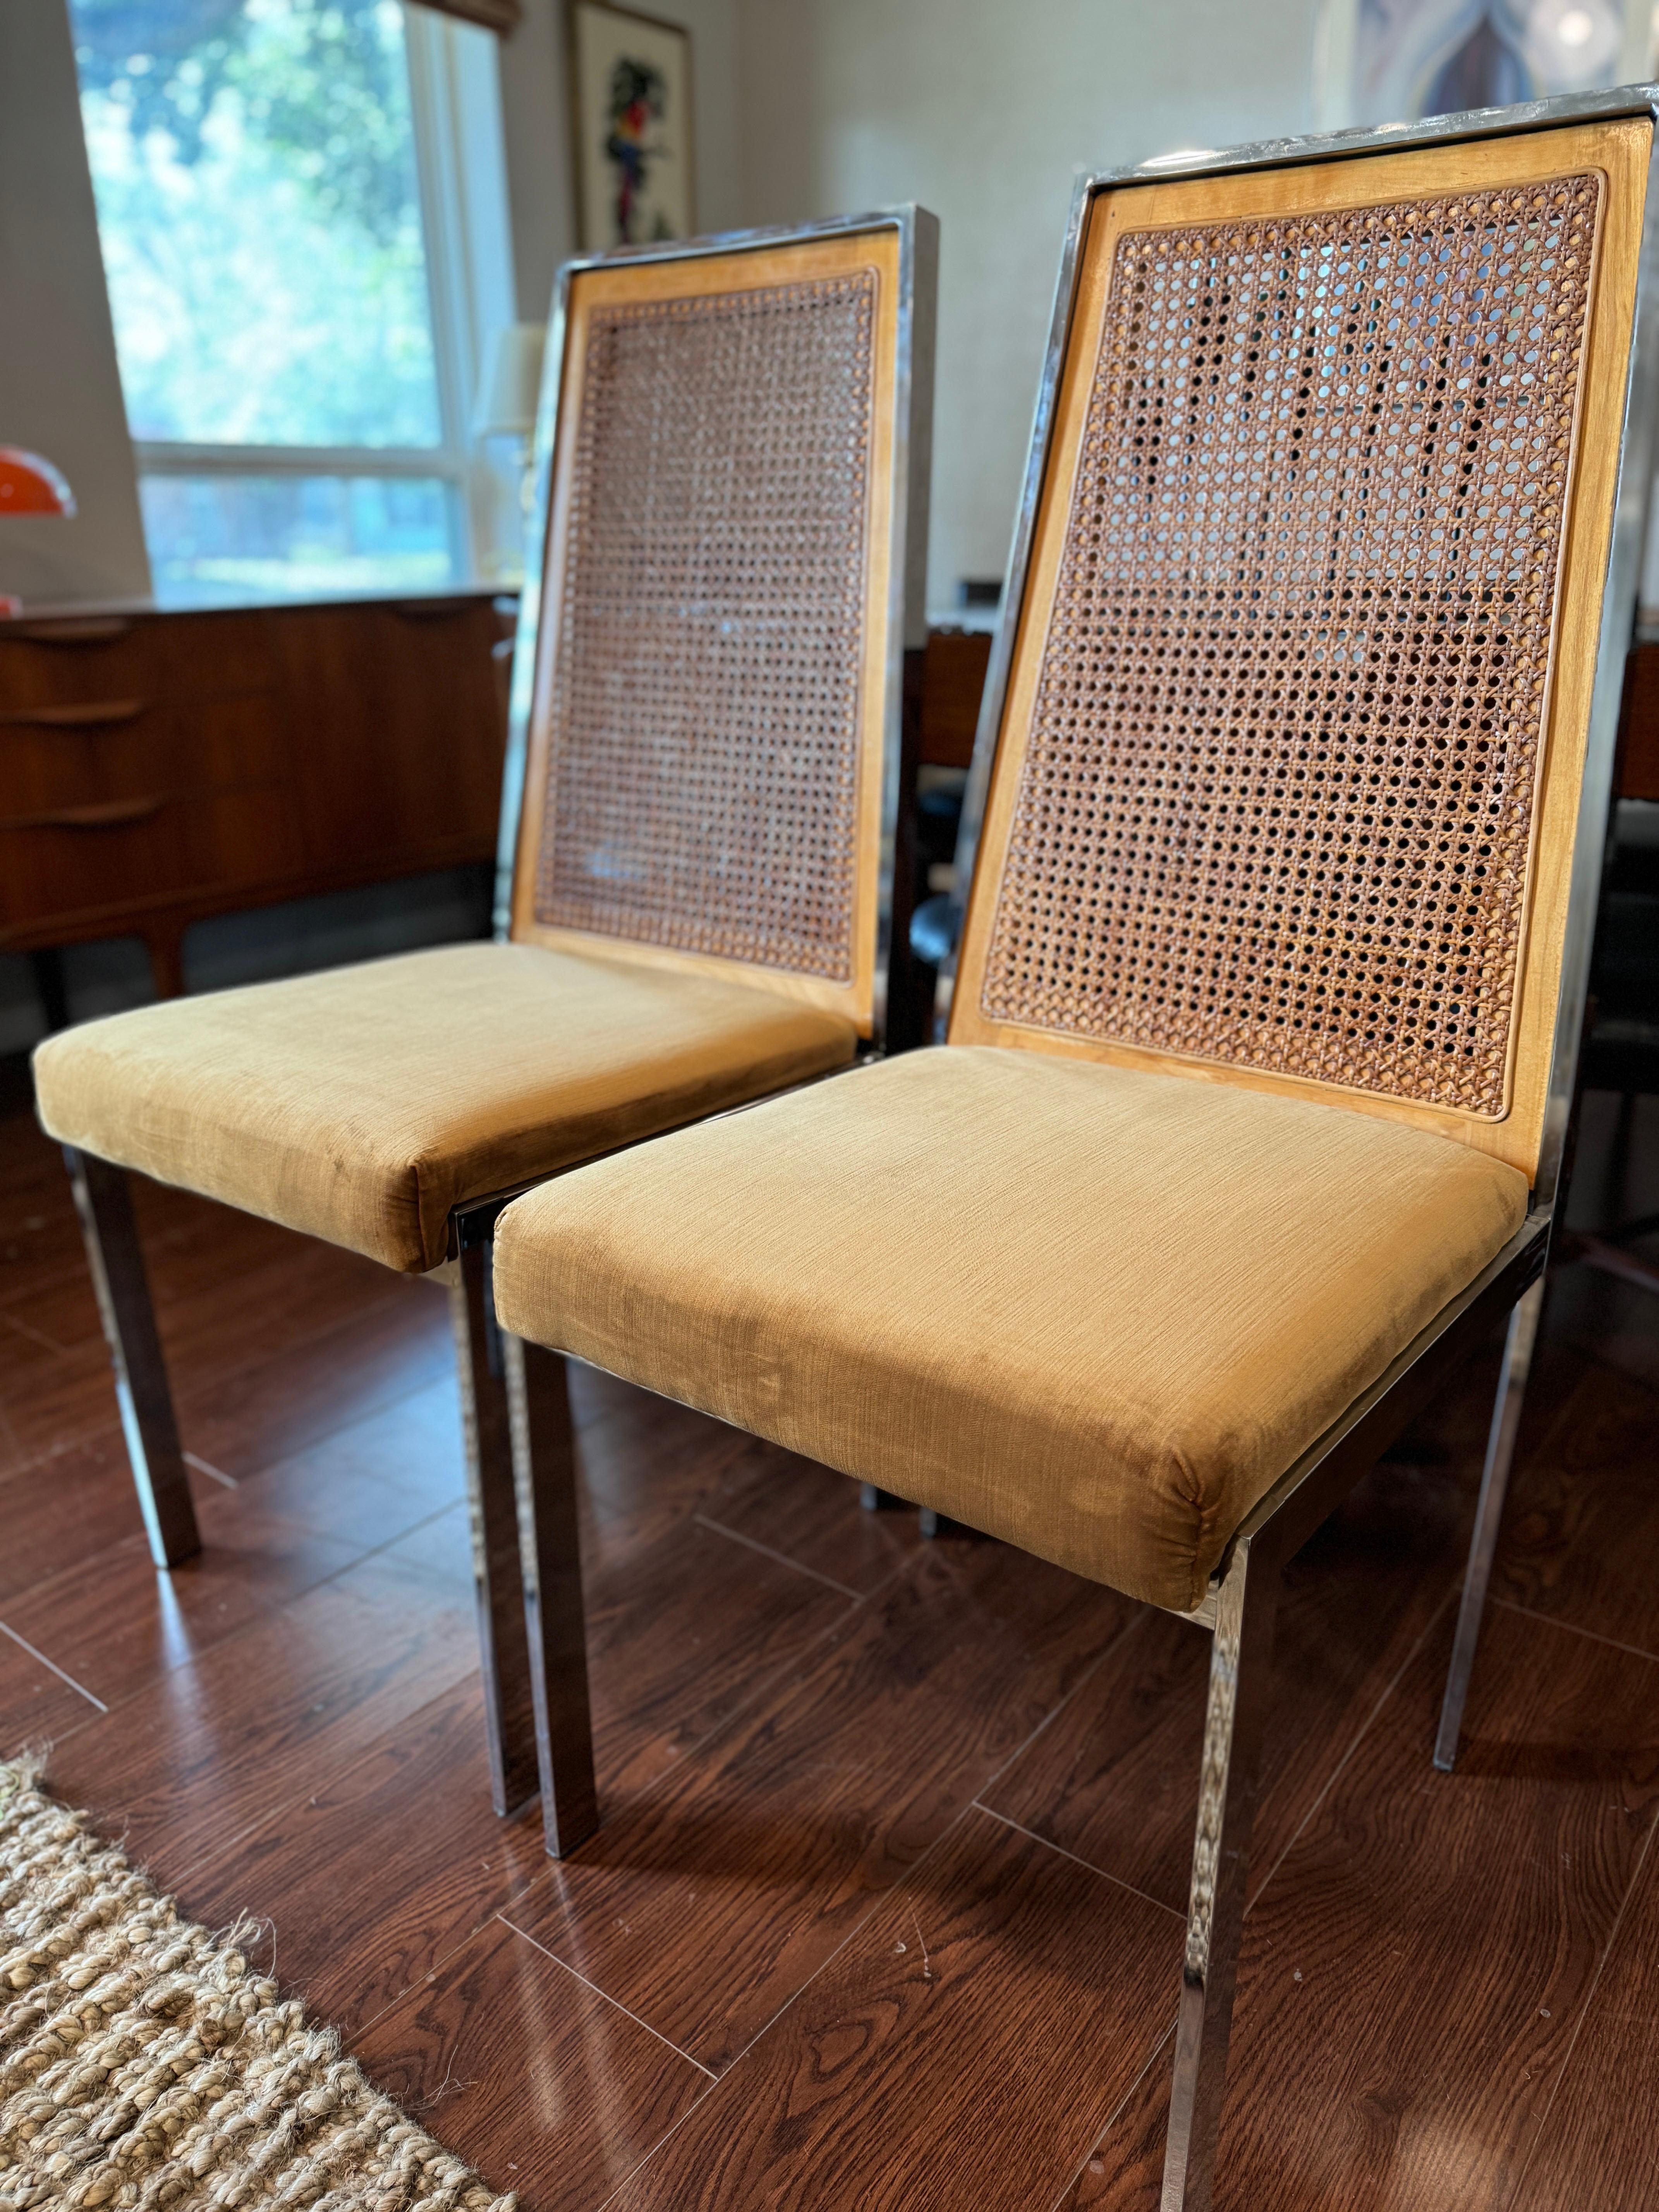 Vintage mid century modern chrome chairs with a cane backing, circa 1960s For Sale 2